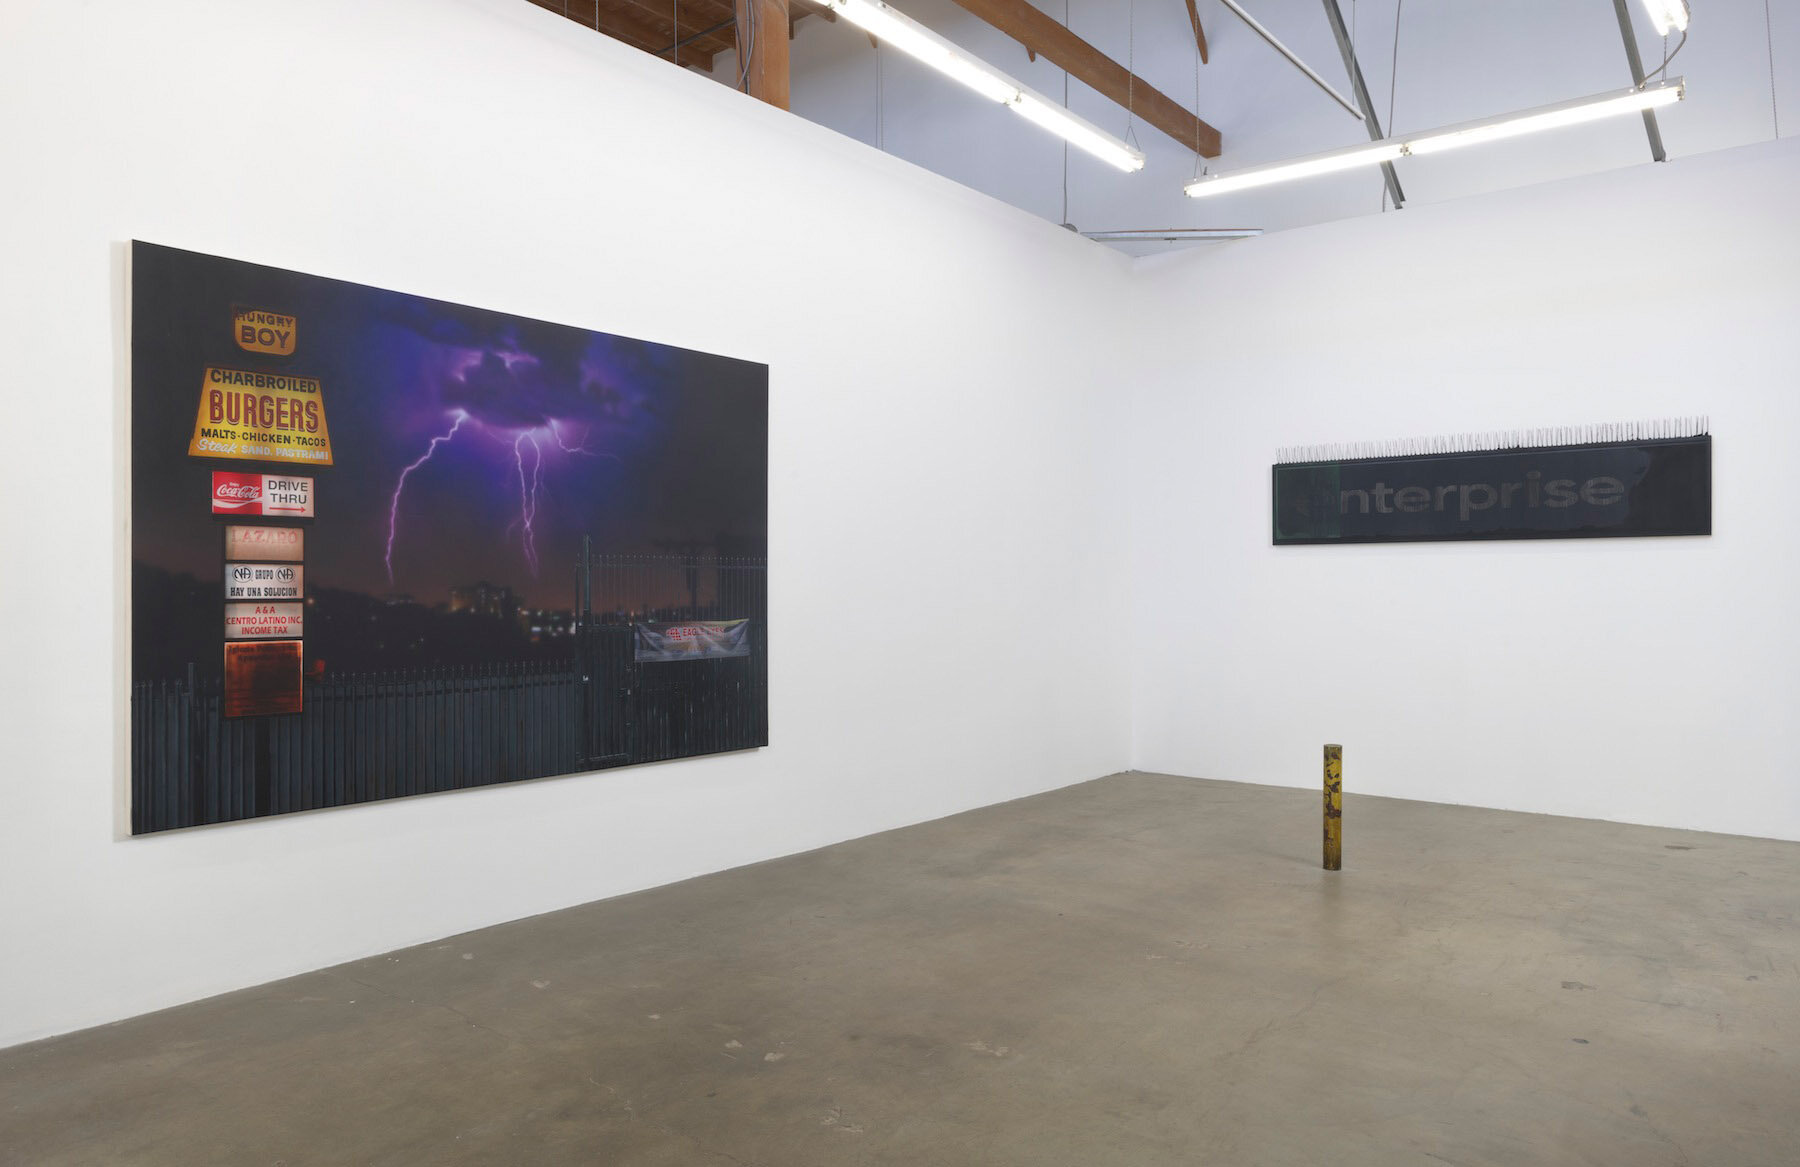  X-Scapes, 2019. Installation view. Image credit: Robert Wedemeyer 